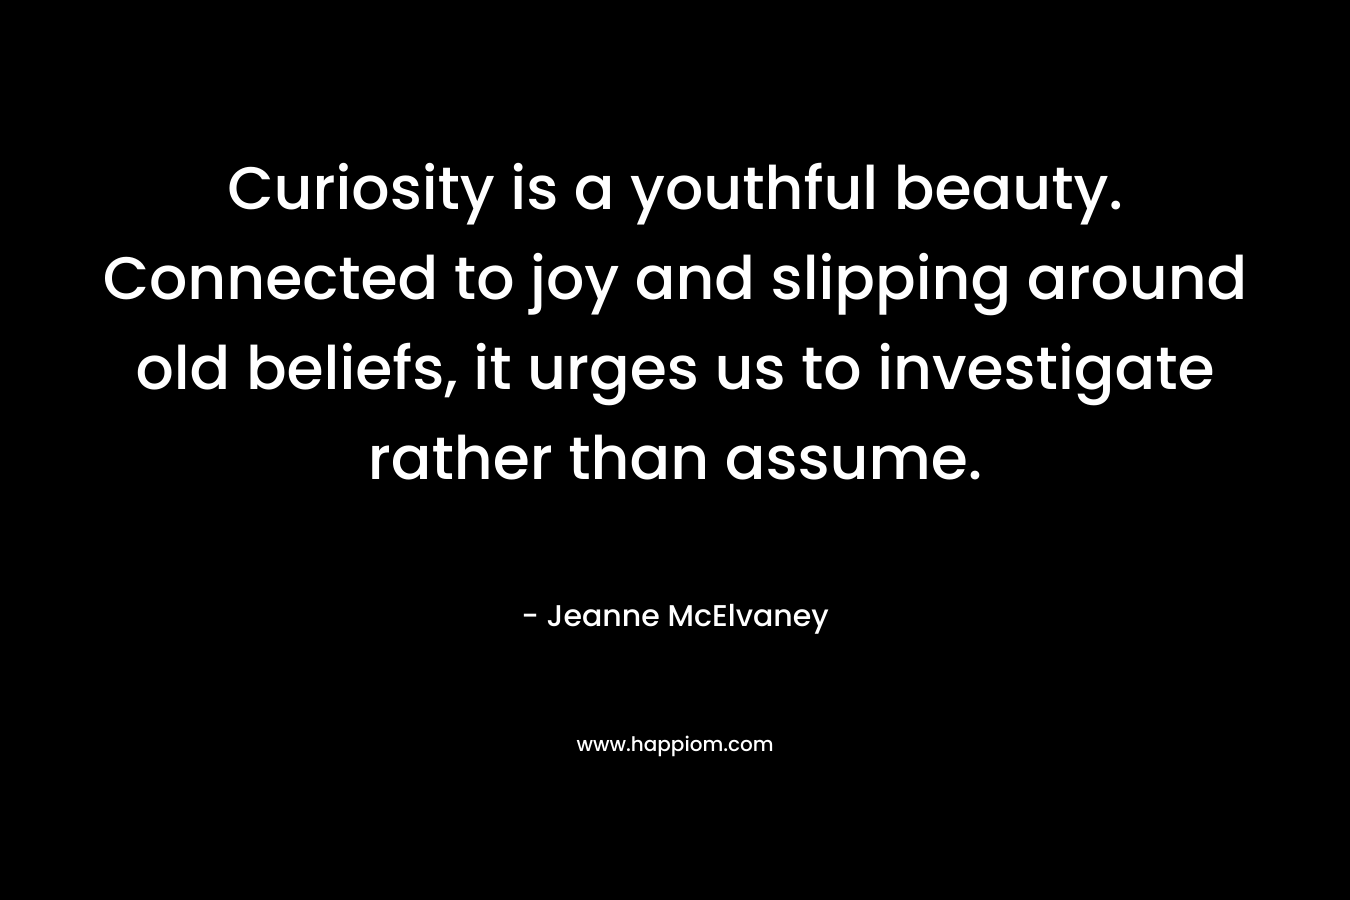 Curiosity is a youthful beauty. Connected to joy and slipping around old beliefs, it urges us to investigate rather than assume. – Jeanne McElvaney